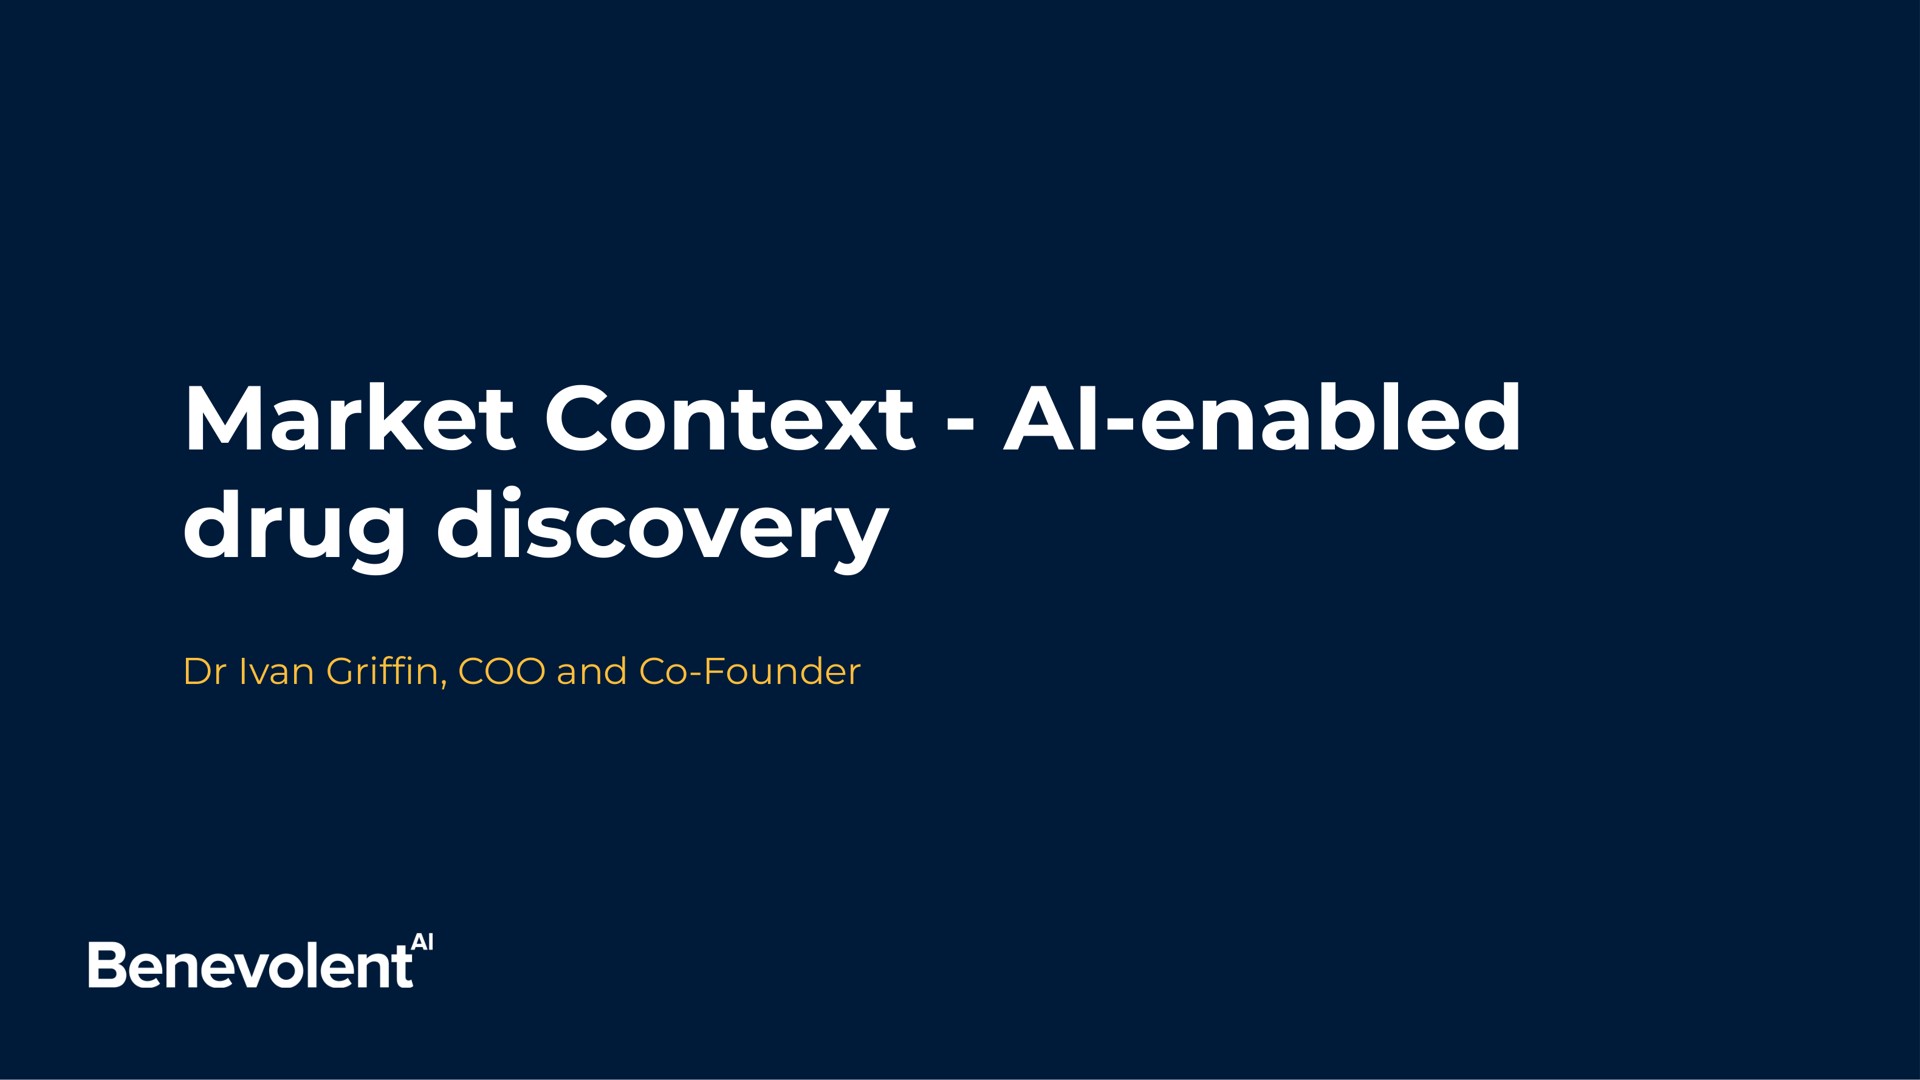 market context enabled drug discovery coo and founder enabled benevolent | BenevolentAI